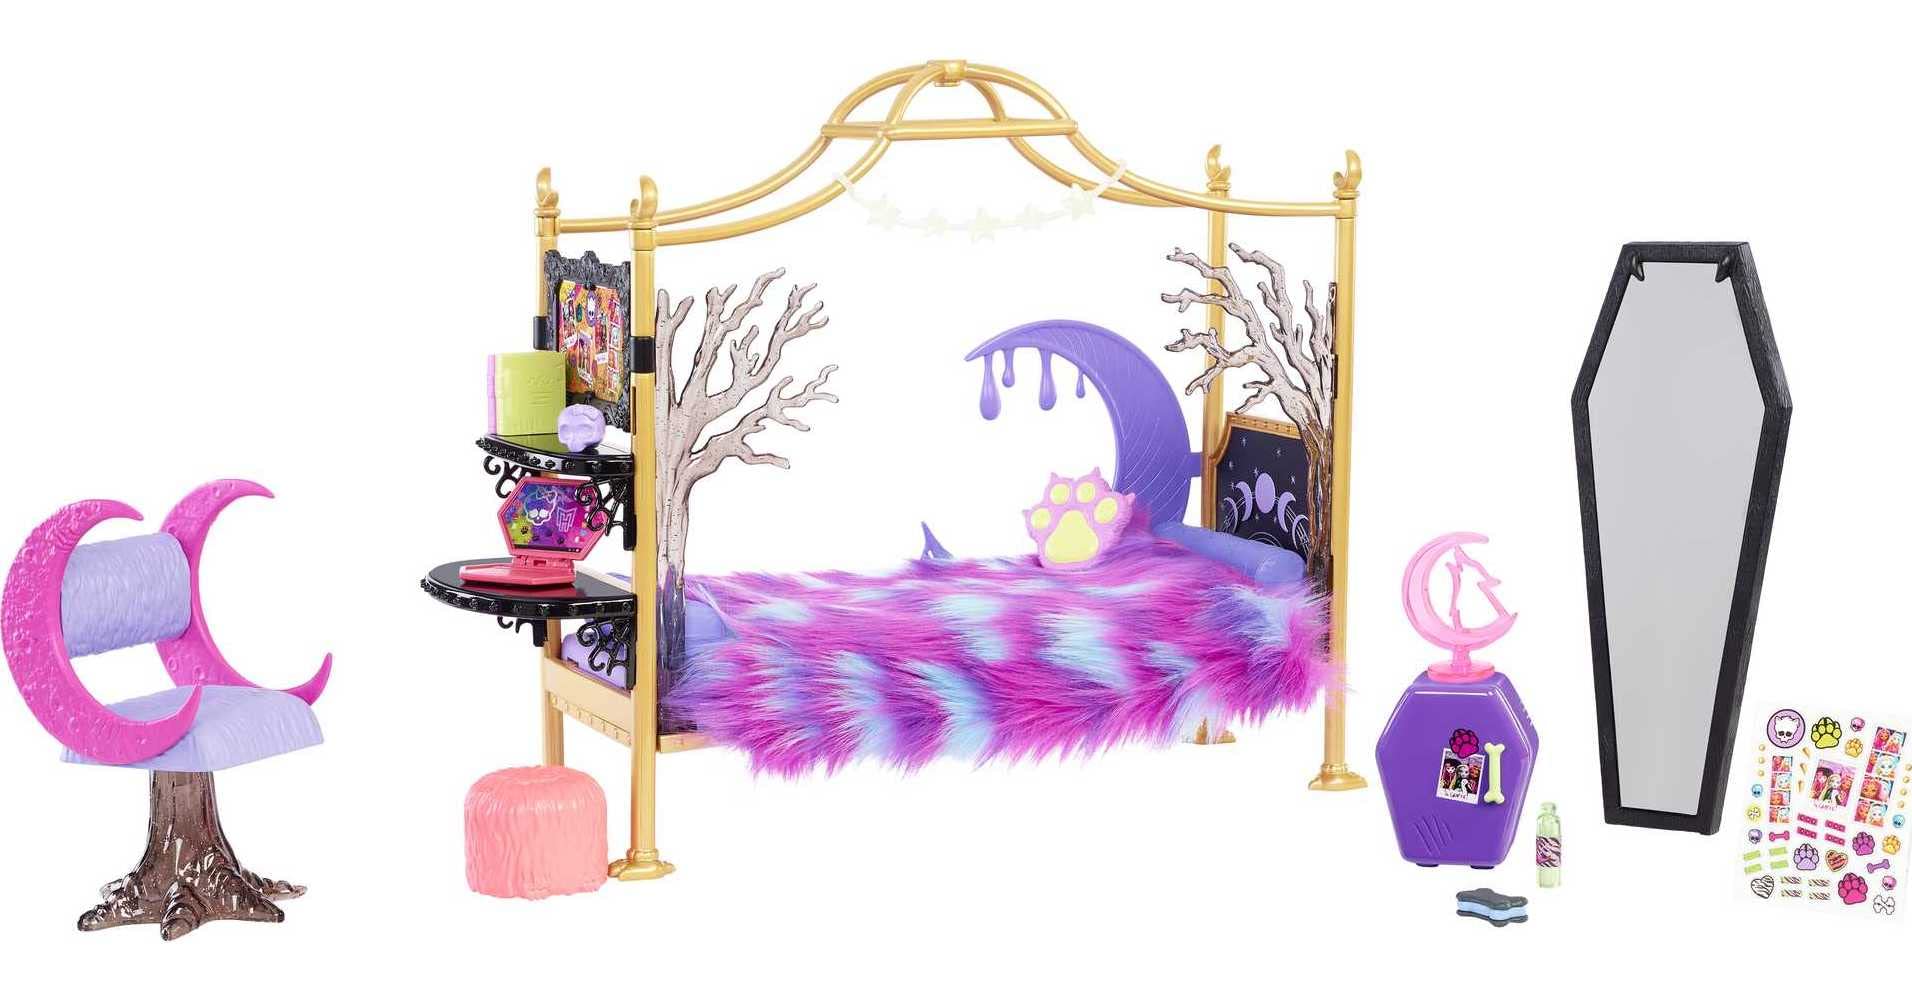 Monster High Playset, Clawdeen Wolf Bedroom with Doll House Furniture & Accessories Like Spooky Decor & Snacks, Sticker Sheet